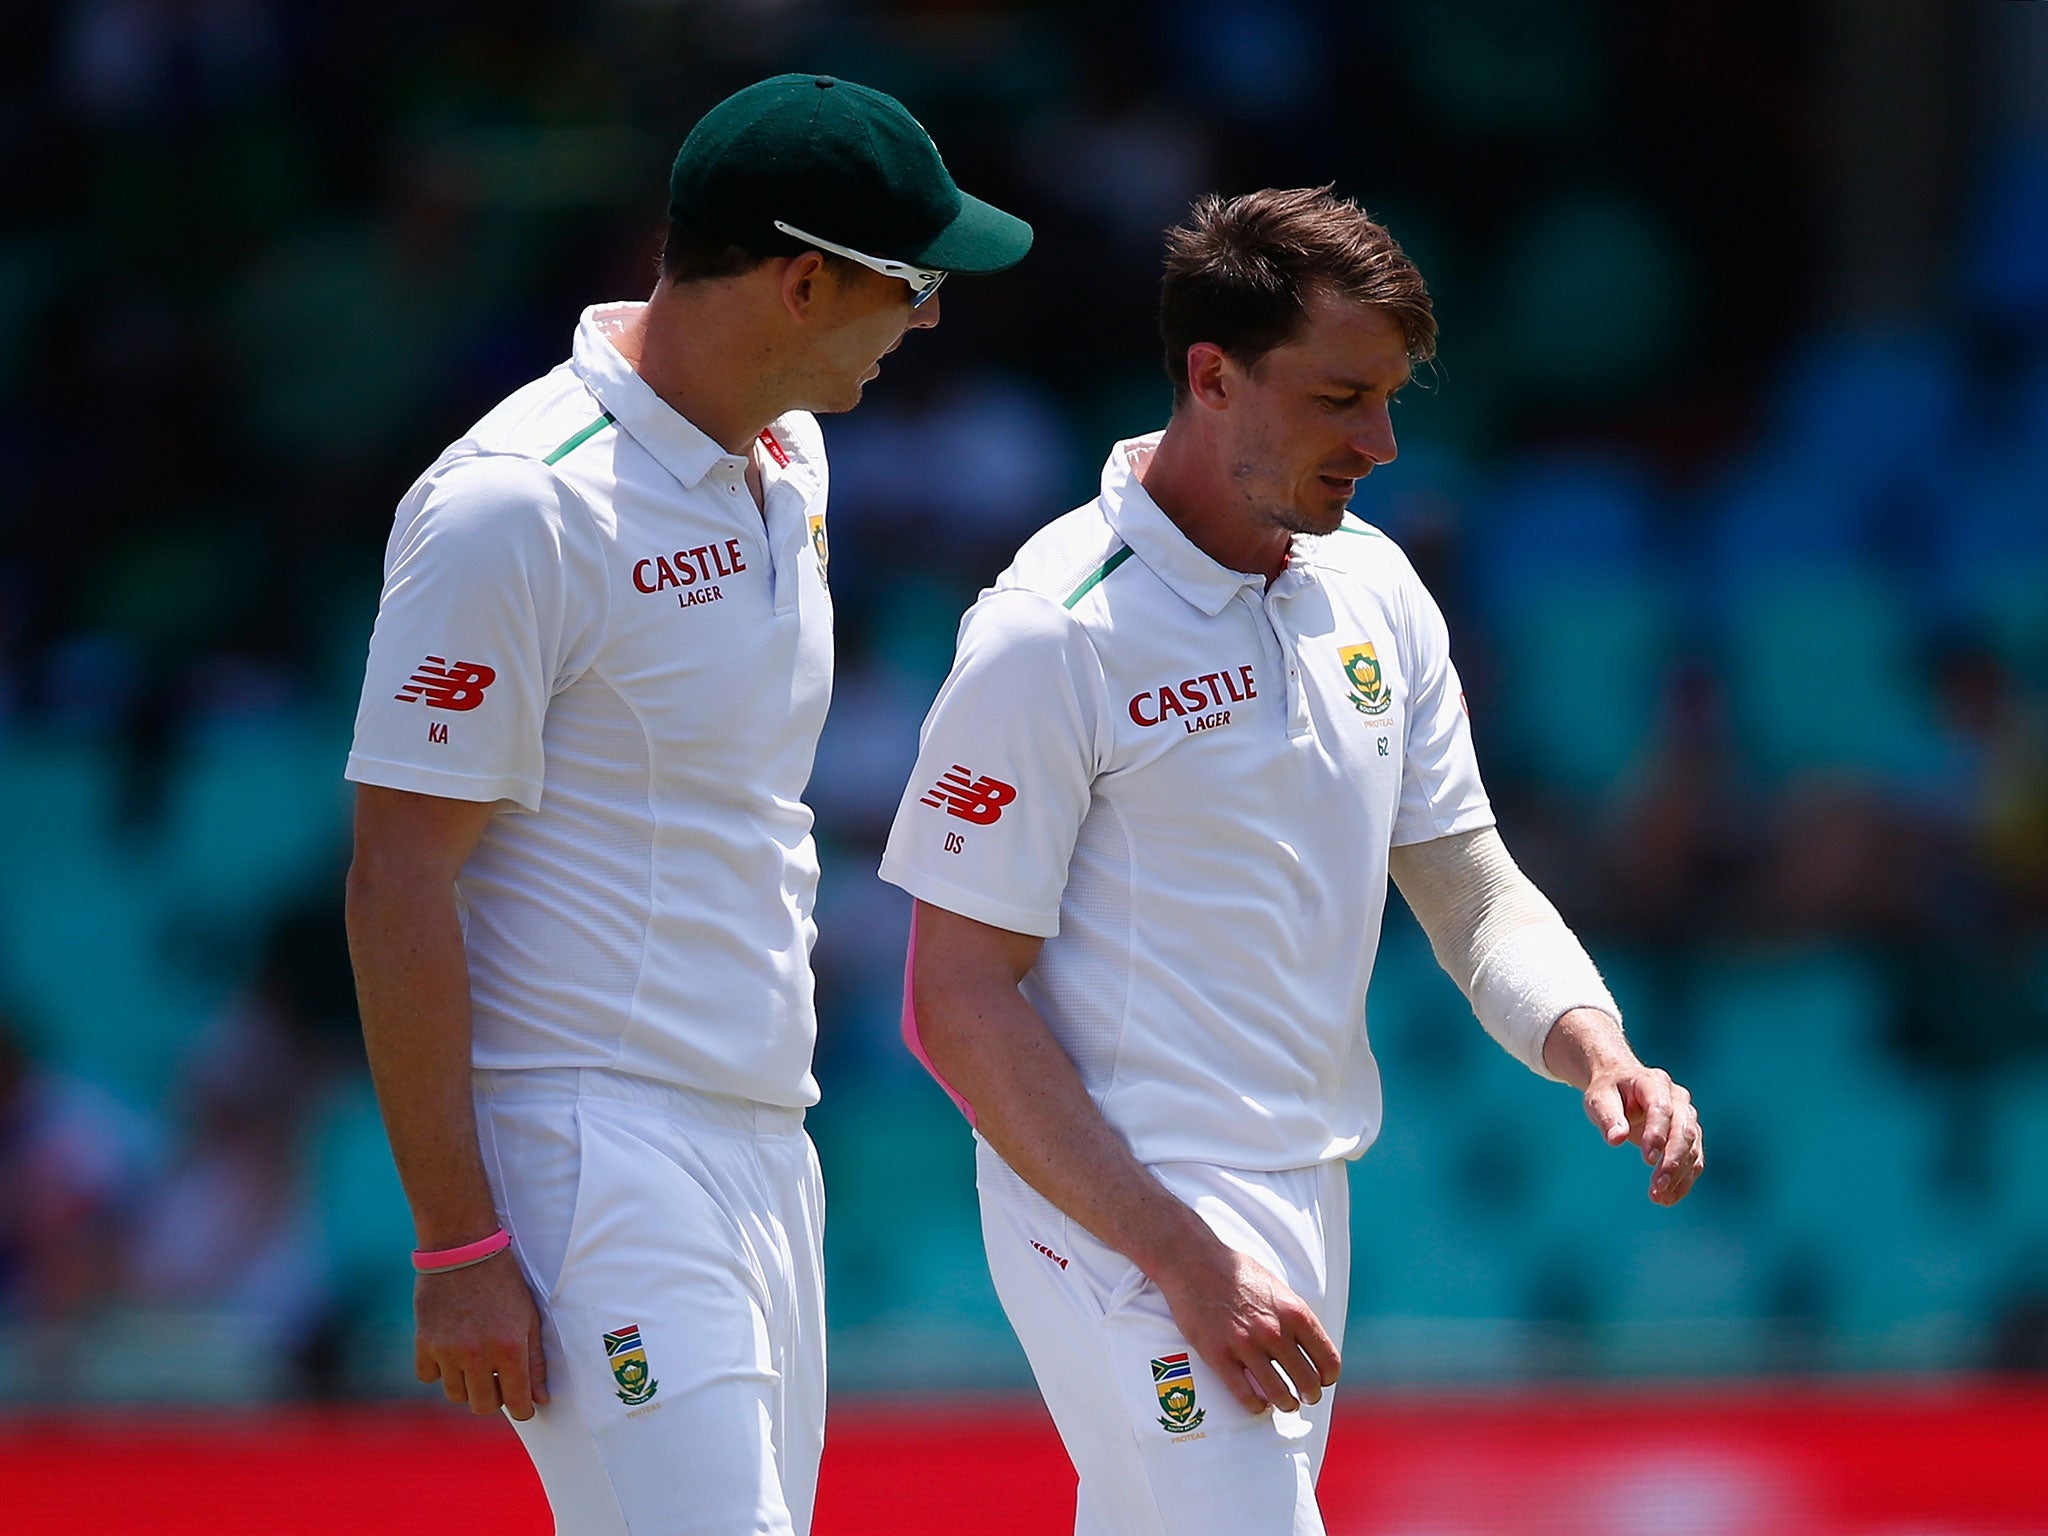 South Africa's Dale Steyn (right) will not bowl again in the first Test with England due to a shoulder injury